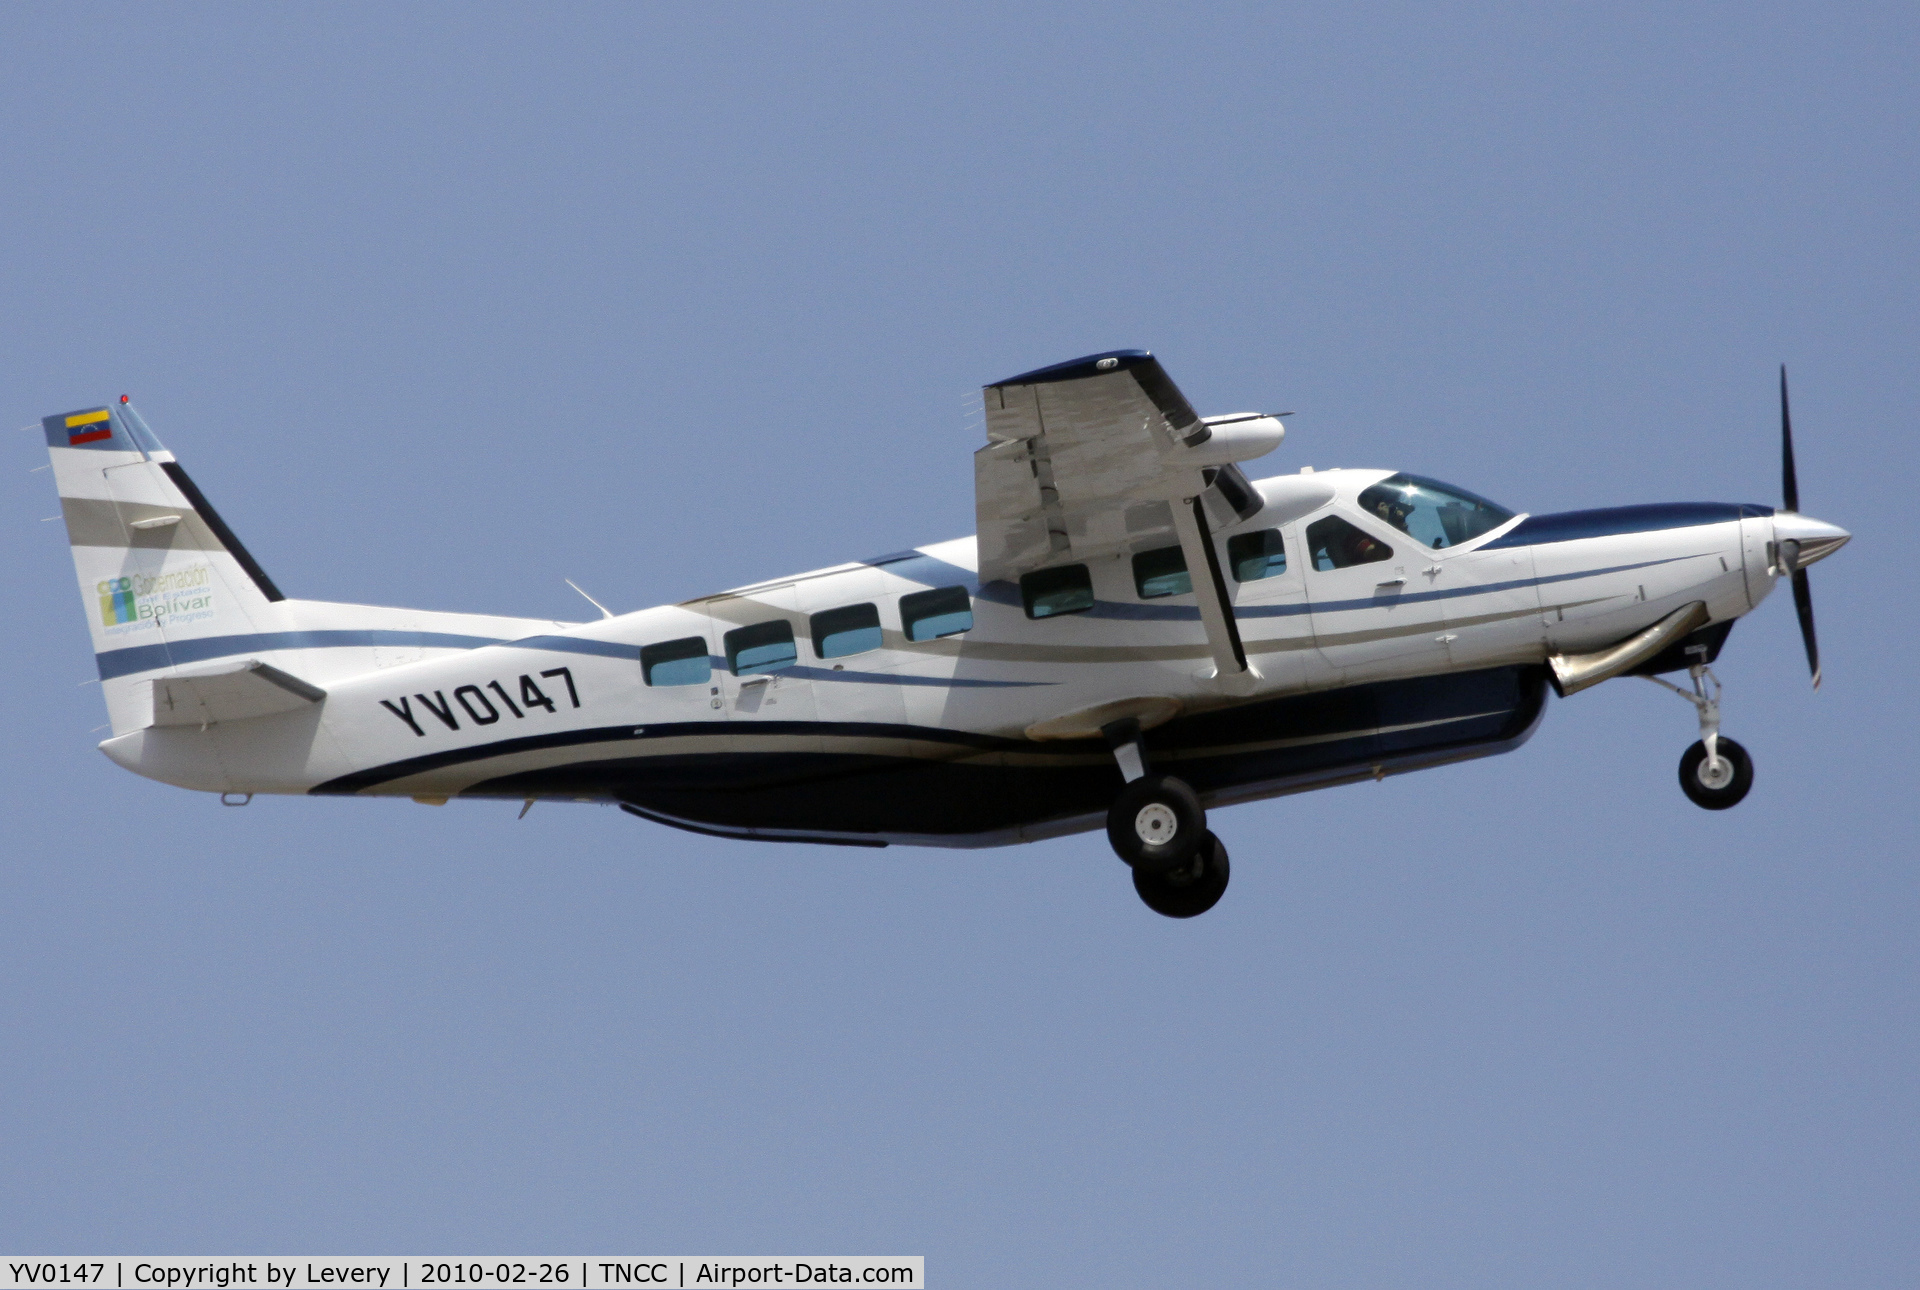 YV0147, 2010 Cessna 208B C/N 208B2162, Departure from Curacao.